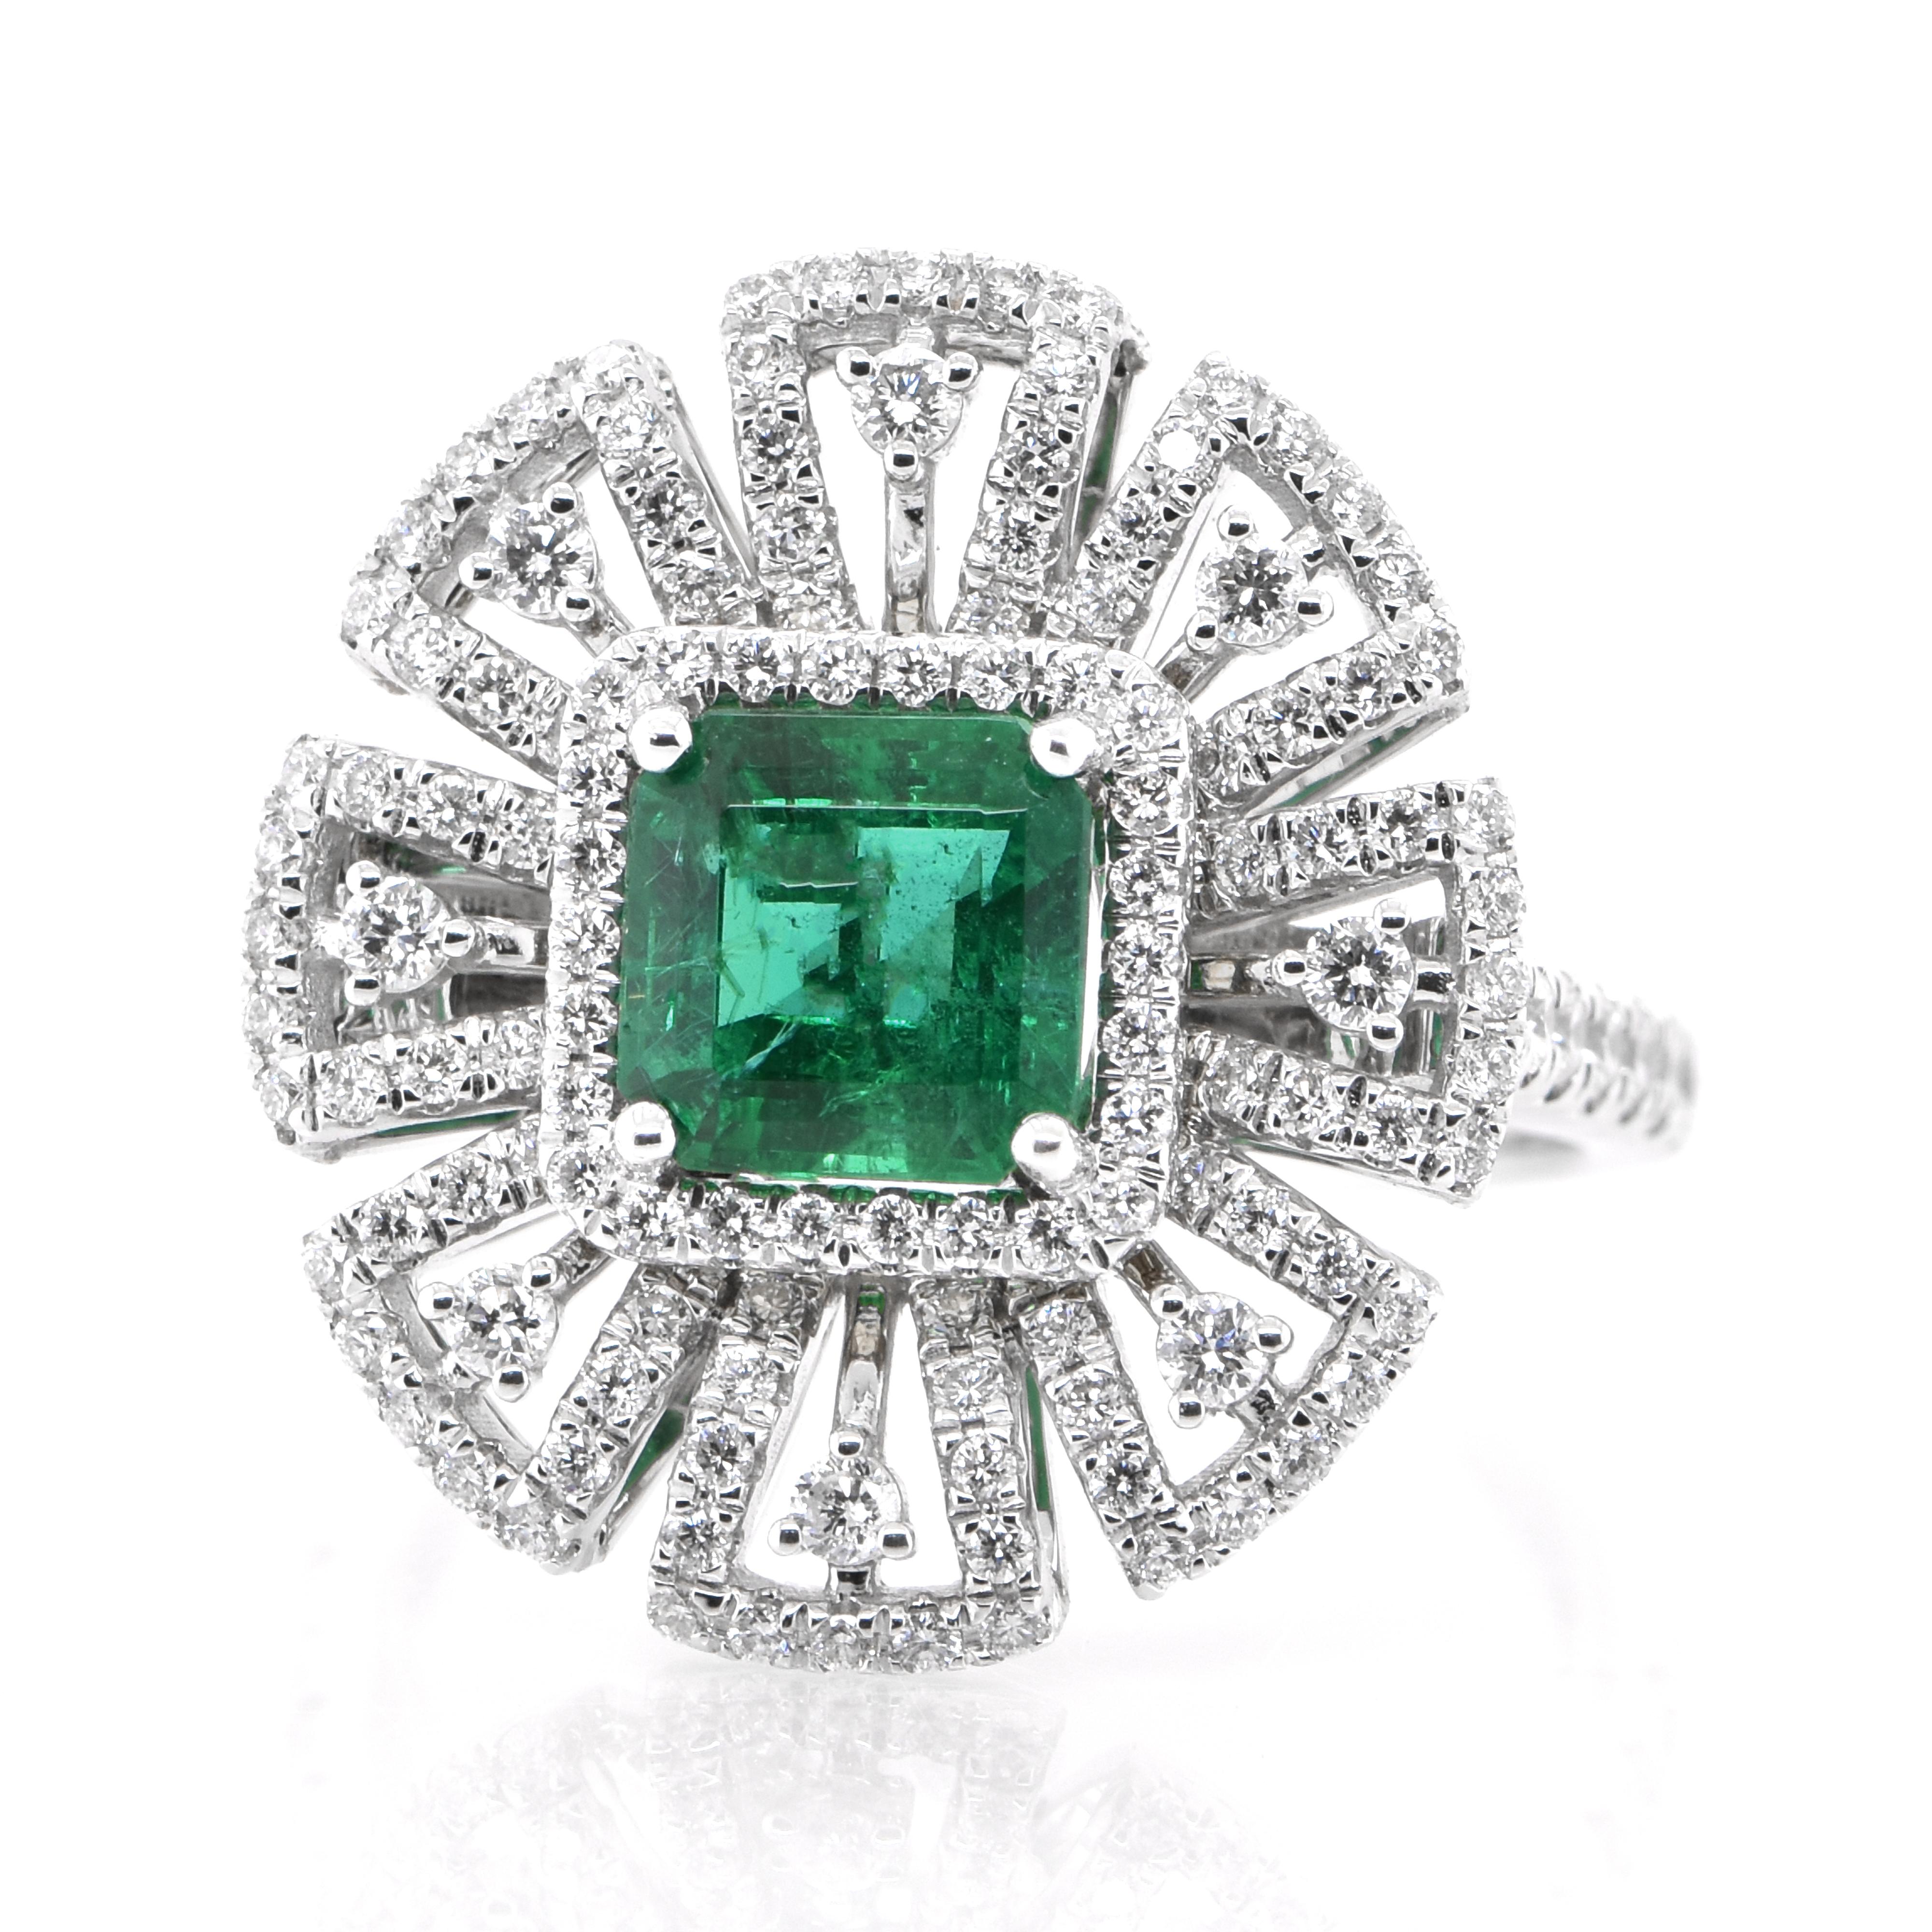 A stunning ring featuring a 1.19 Carat Natural Emerald and 0.82 Carats of Diamond Accents set in 18 Karat White Gold. People have admired emerald’s green for thousands of years. Emeralds have always been associated with the lushest landscapes and